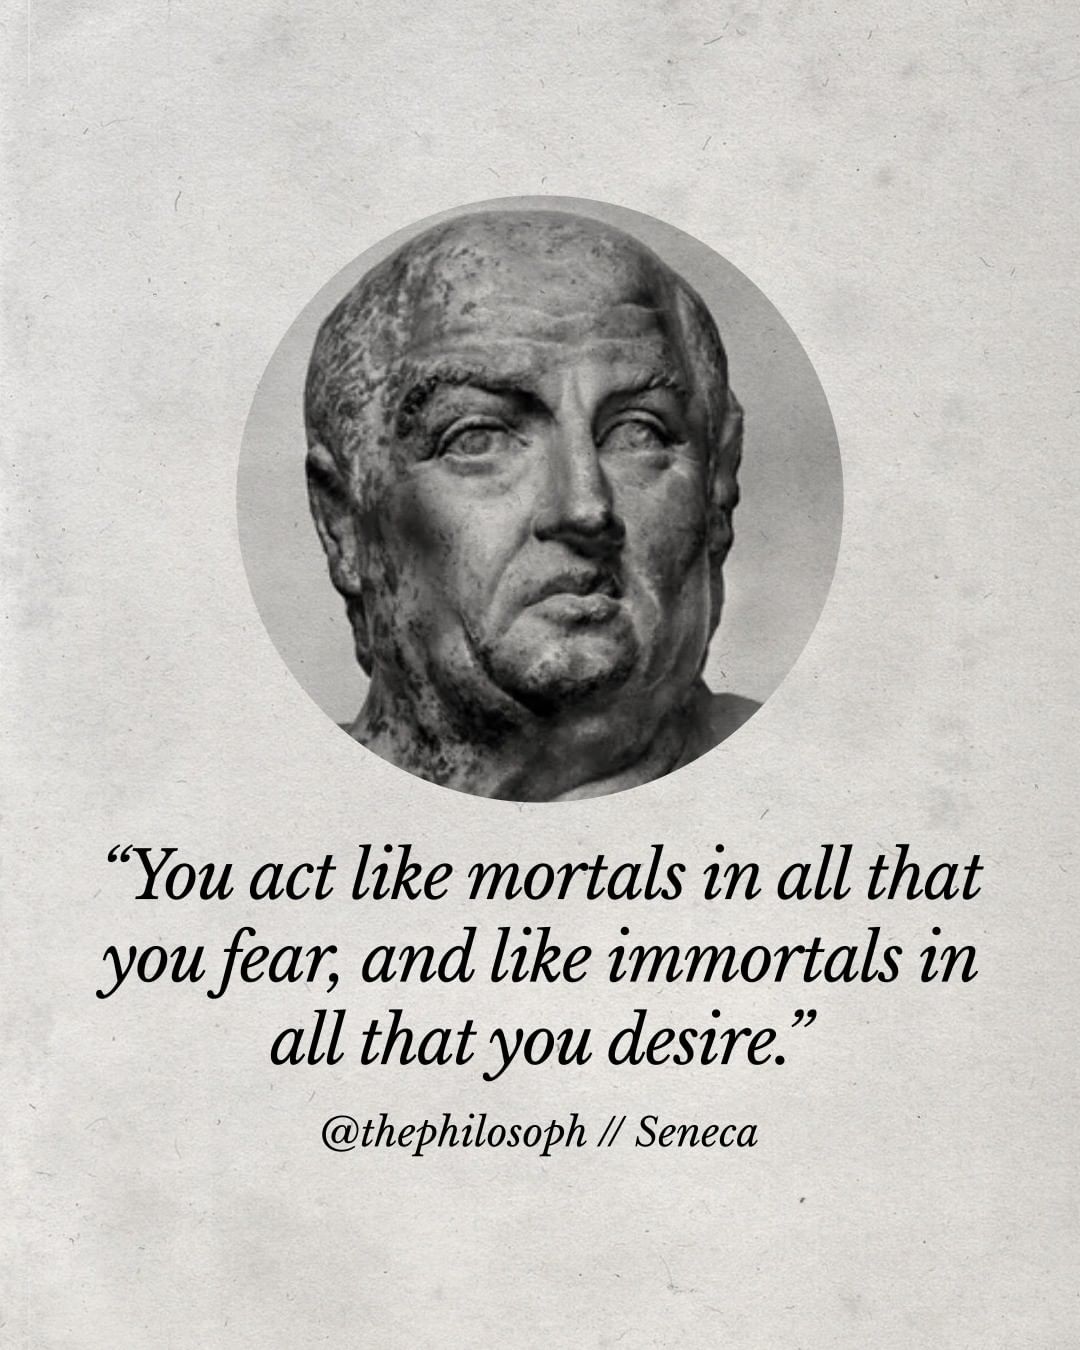 You act like mortals in all that you fear, and like immortals in all that you desire